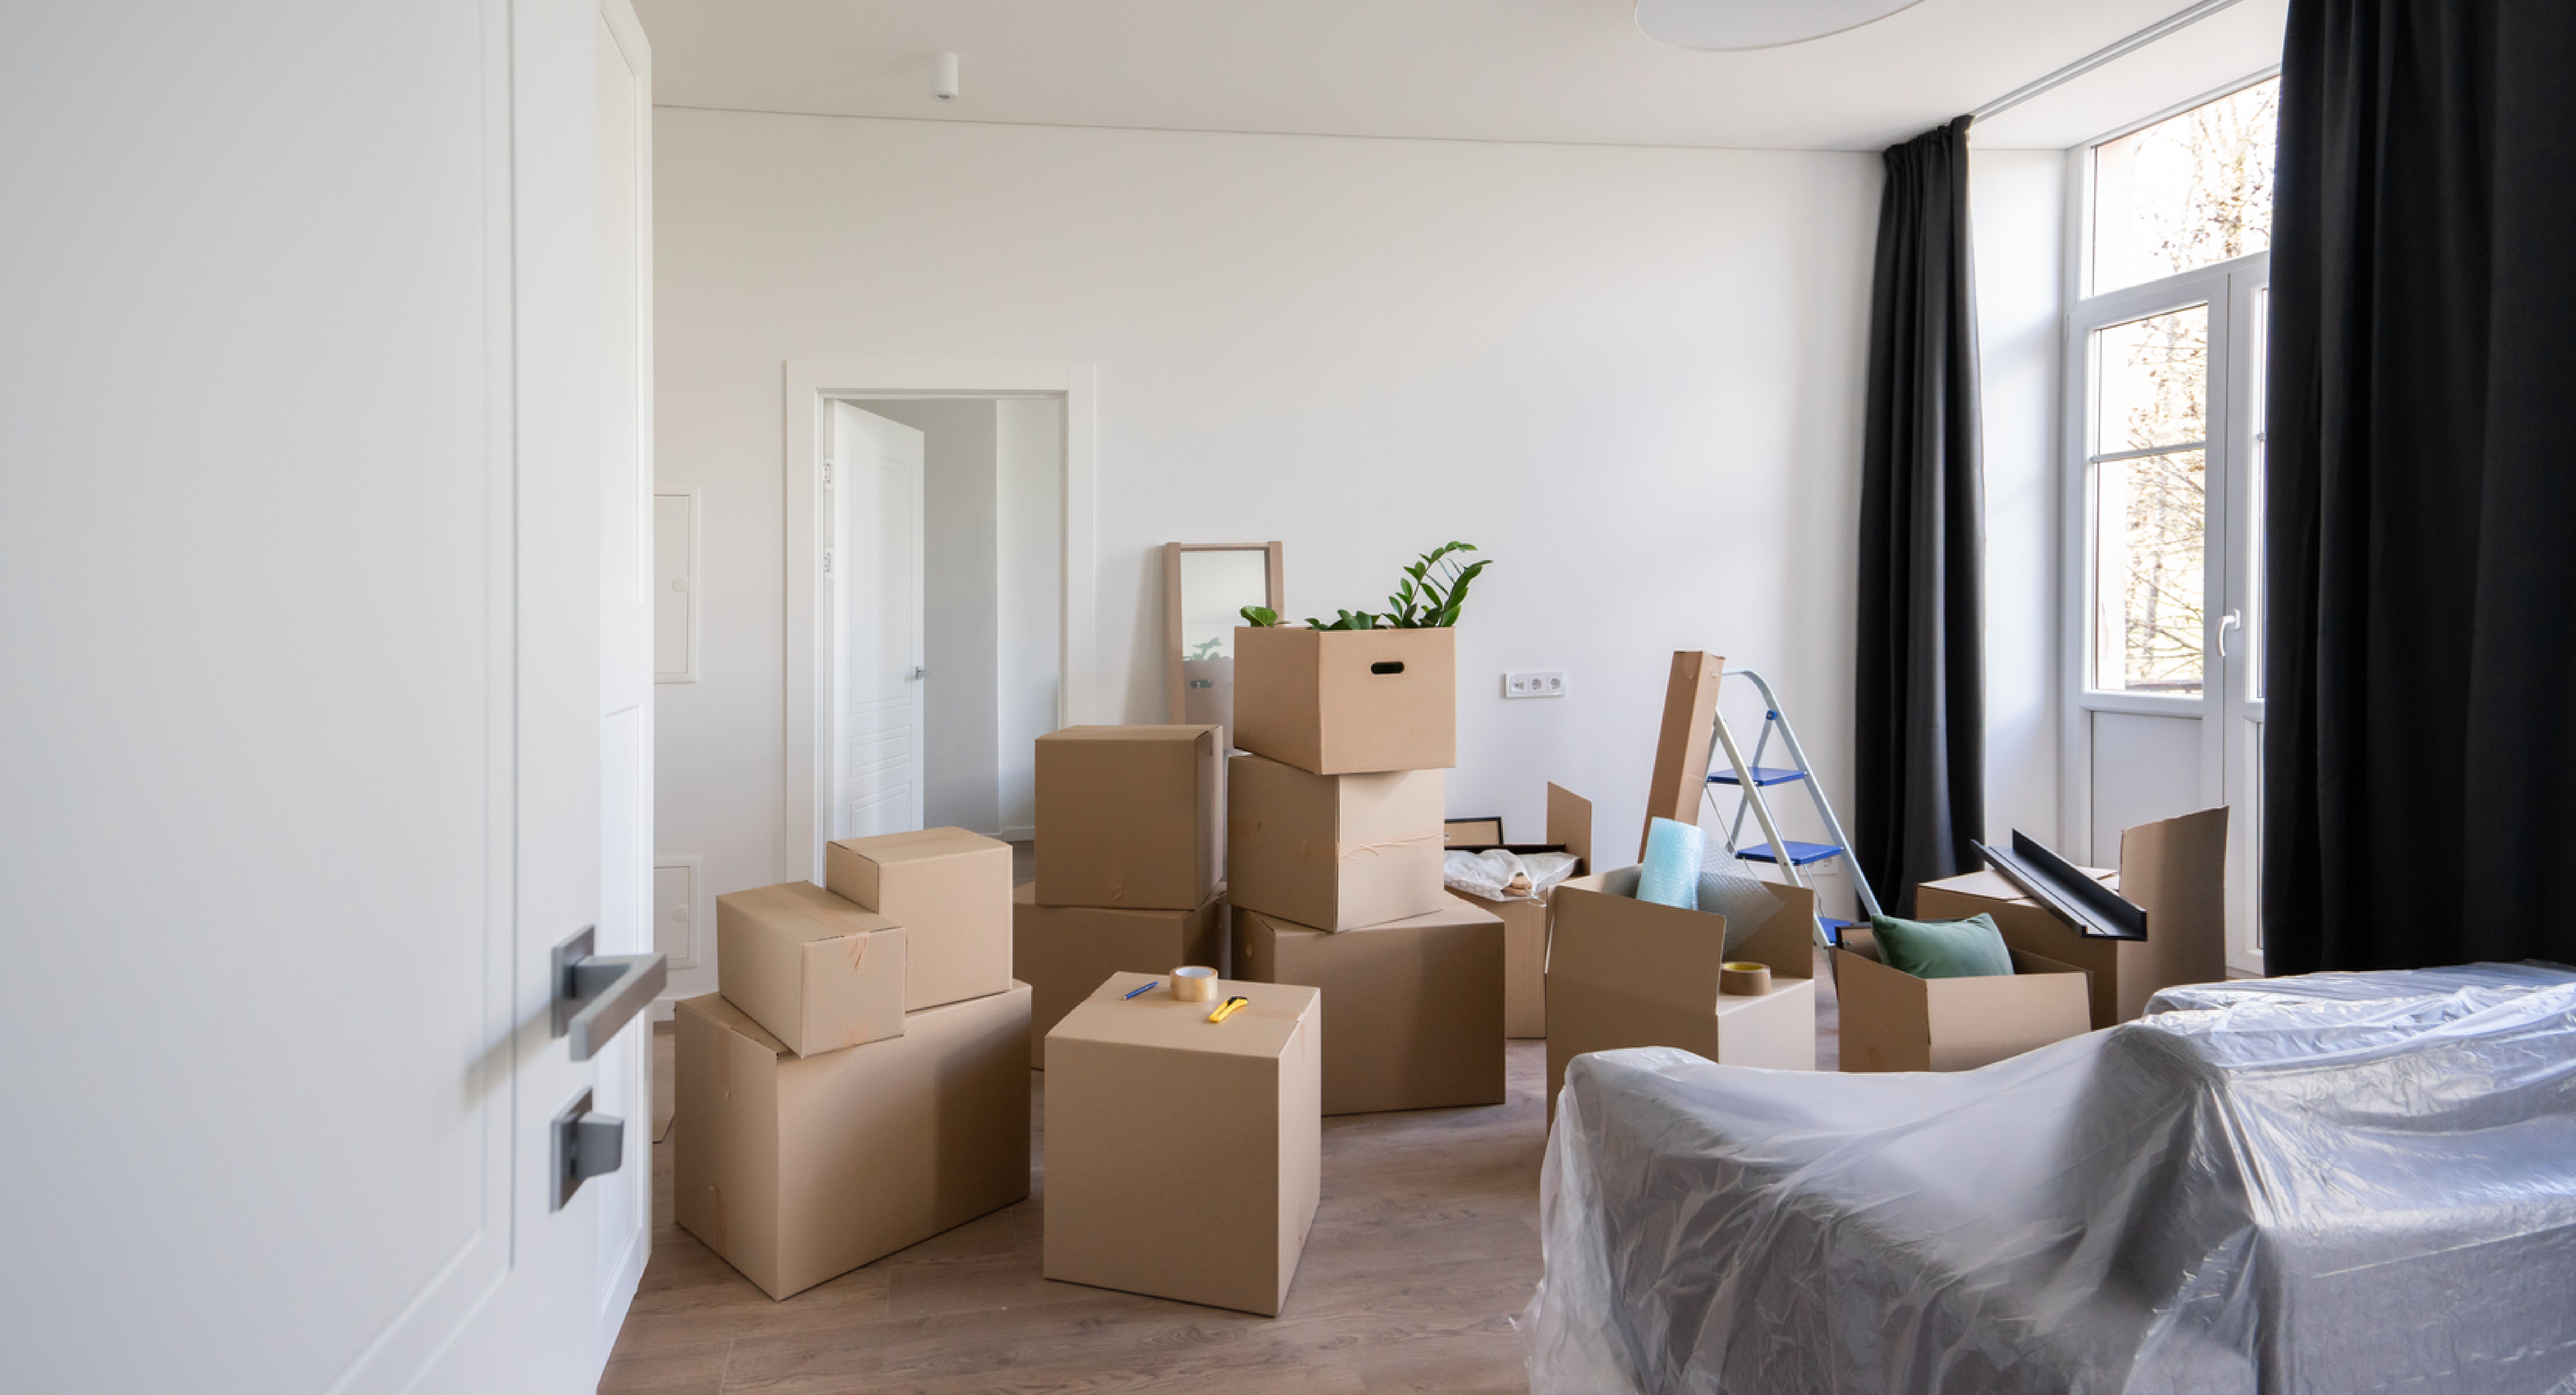 Moving Boxes Piled up in a New Apartment - Toggle Renters Insurance